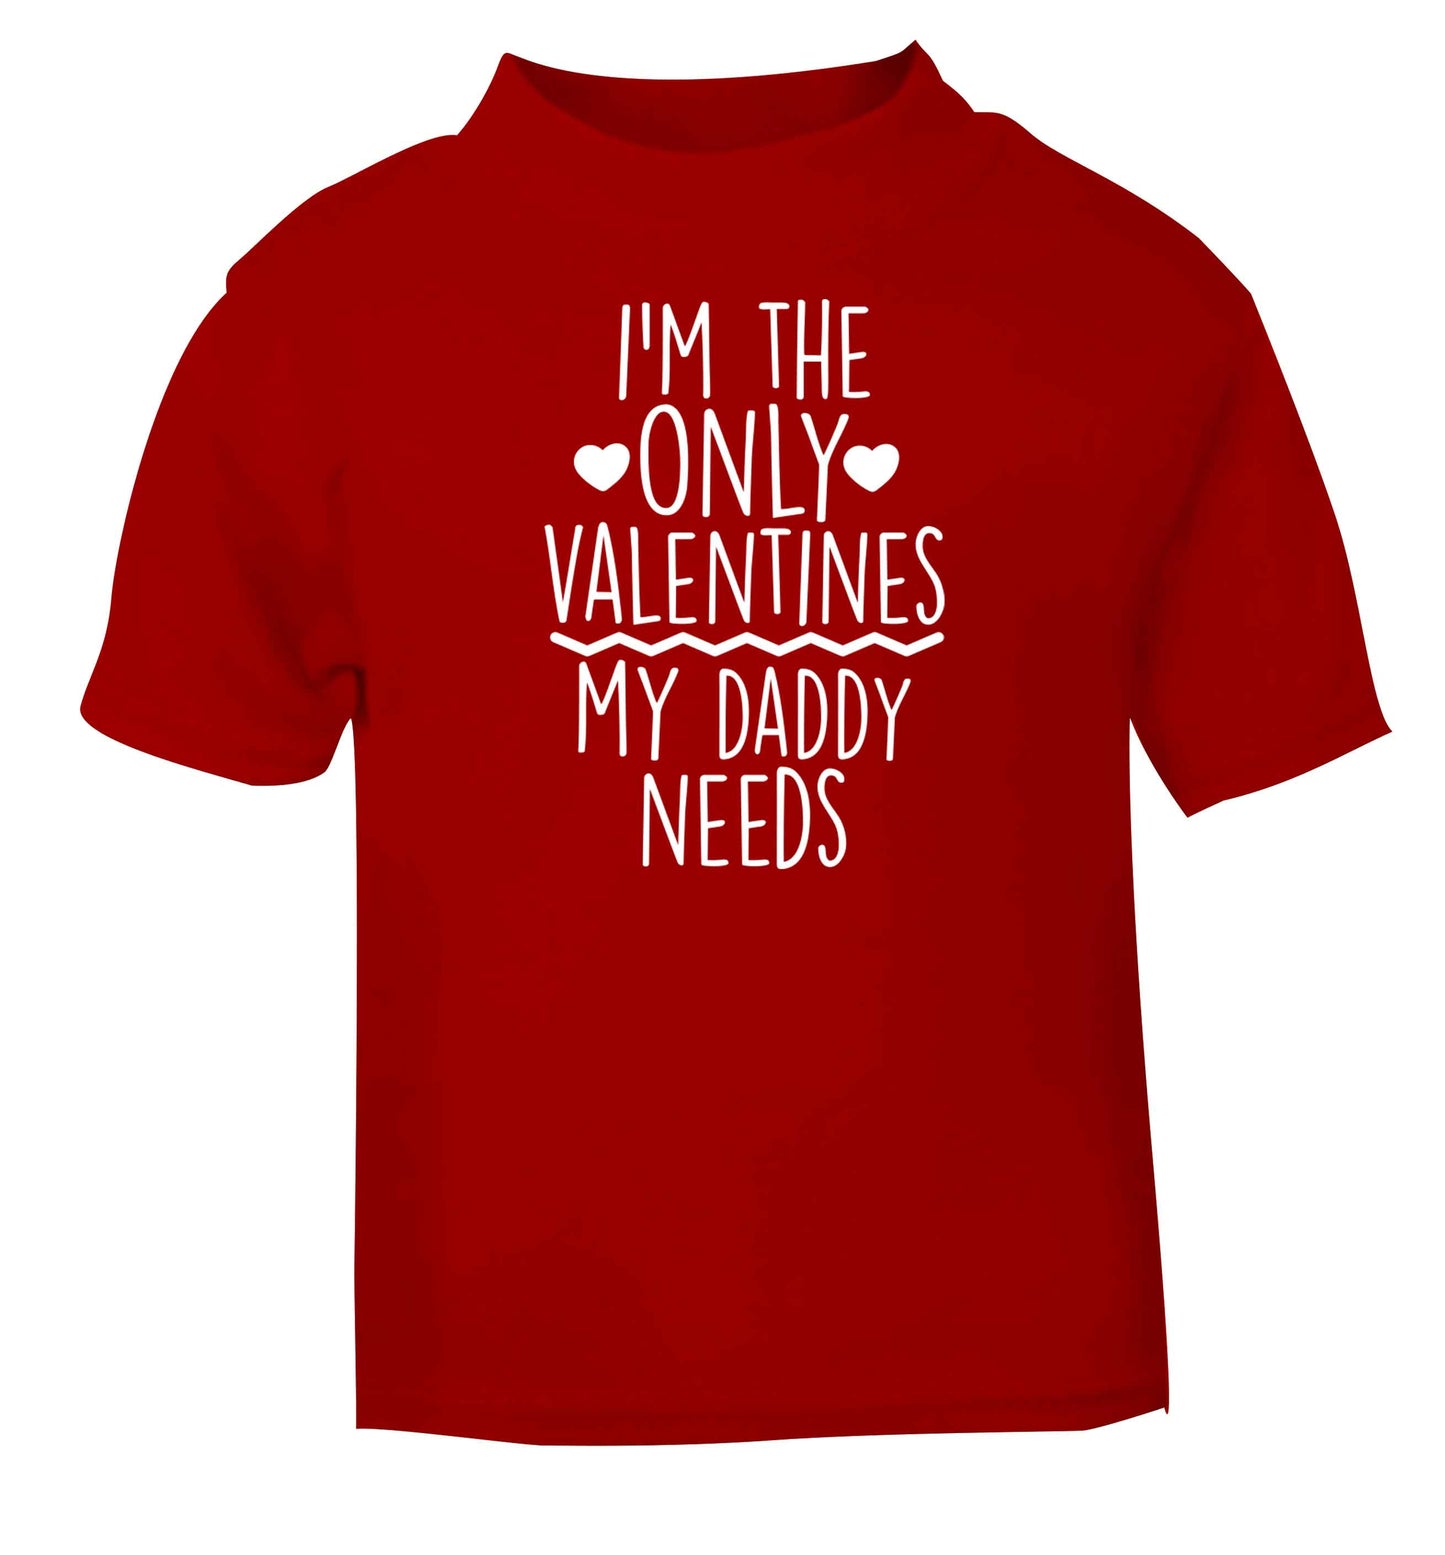 I'm the only valentines my daddy needs red baby toddler Tshirt 2 Years